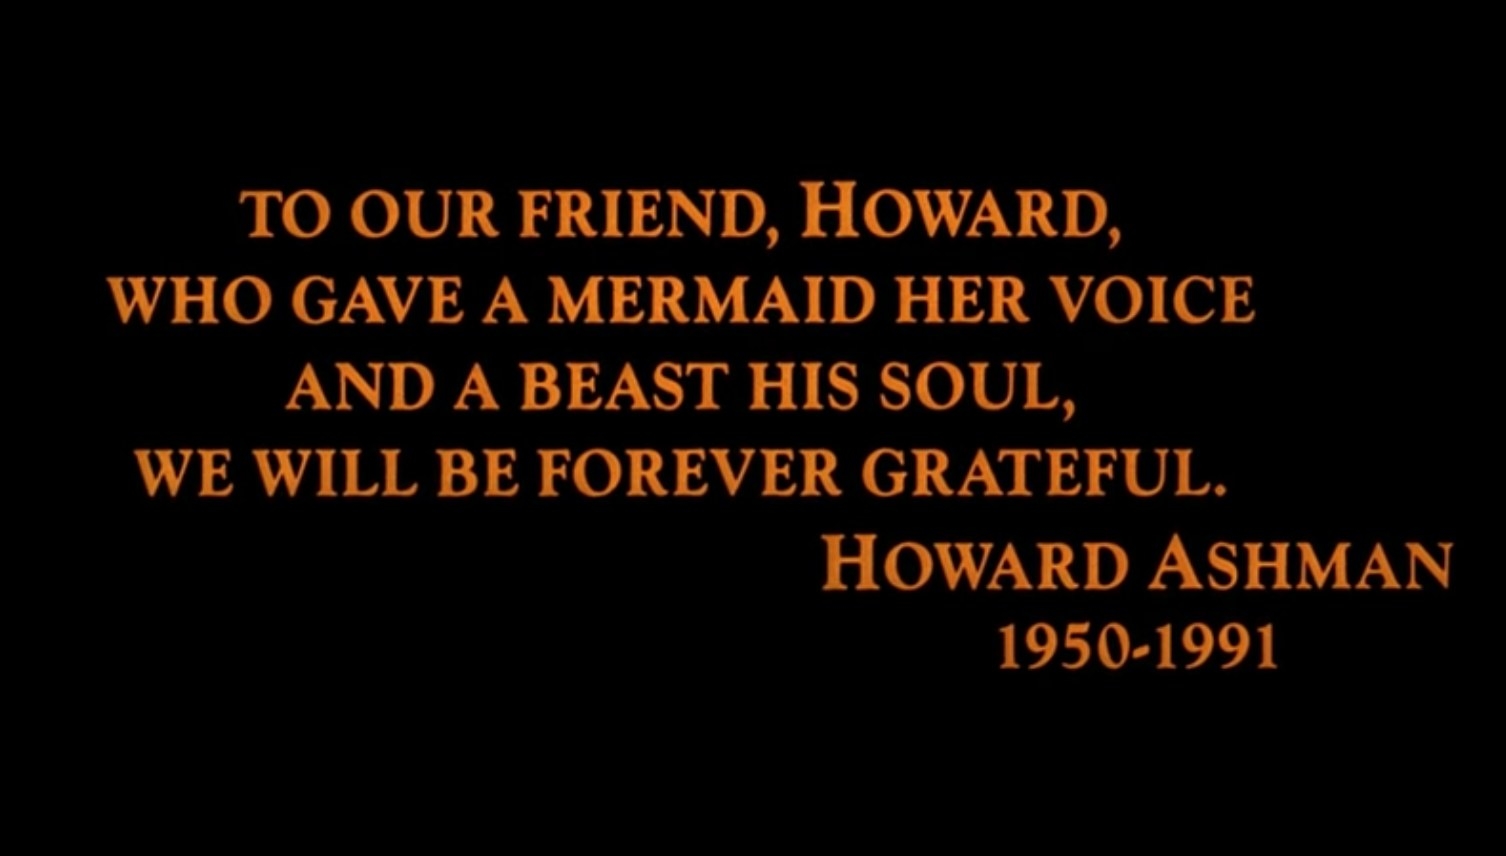 A dedication to Howard Ashman in the end credits of &quot;Beauty and the Beast&quot; reads, &quot;To our friend, Howard, who gave a mermaid her voice and a beast his soul, we will be forever grateful&quot;